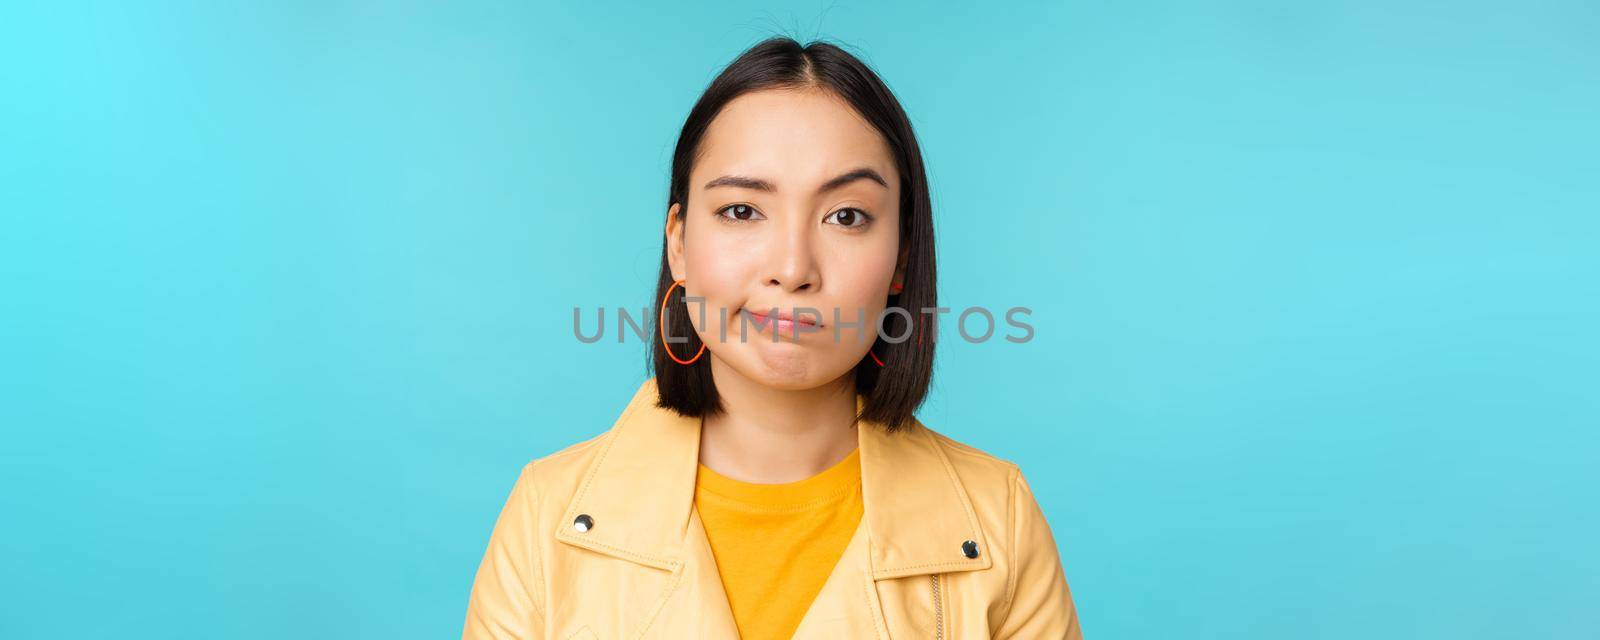 Close up of skeptical asian girl looking disappointed, staring with doubt or disbelief, grimacing at camera, standing over blue background.